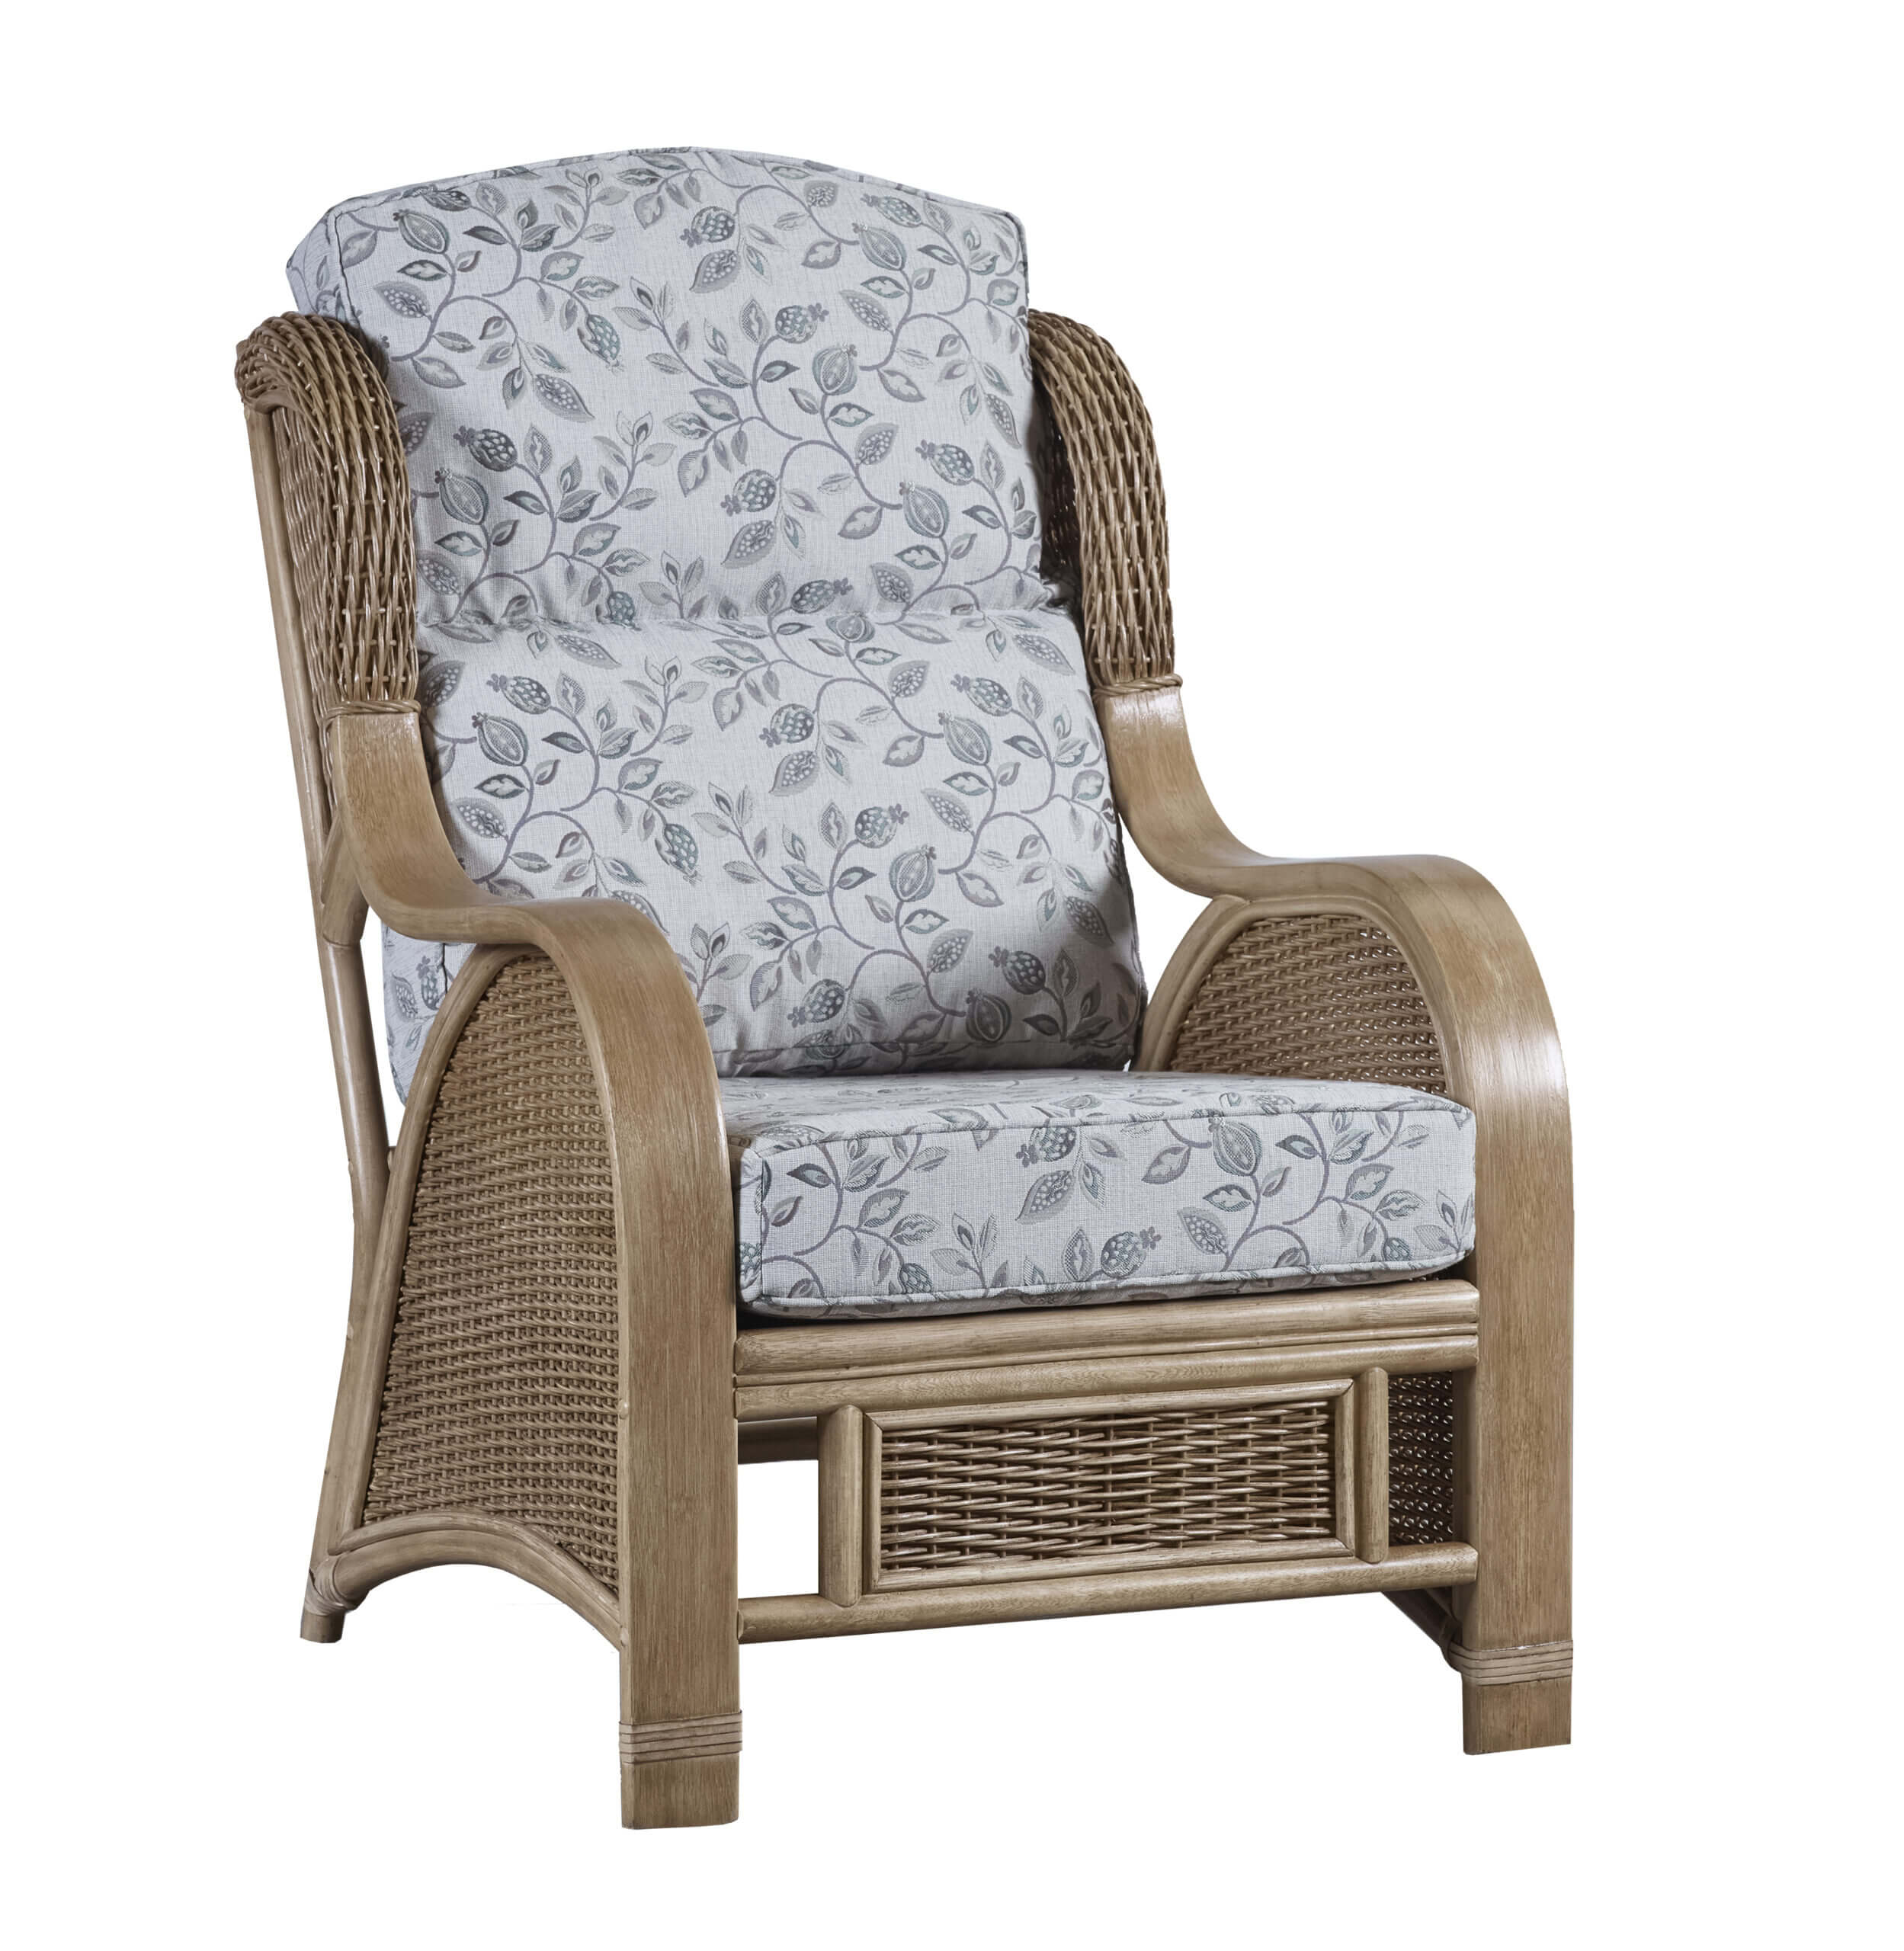 Showing image for Bari armchair